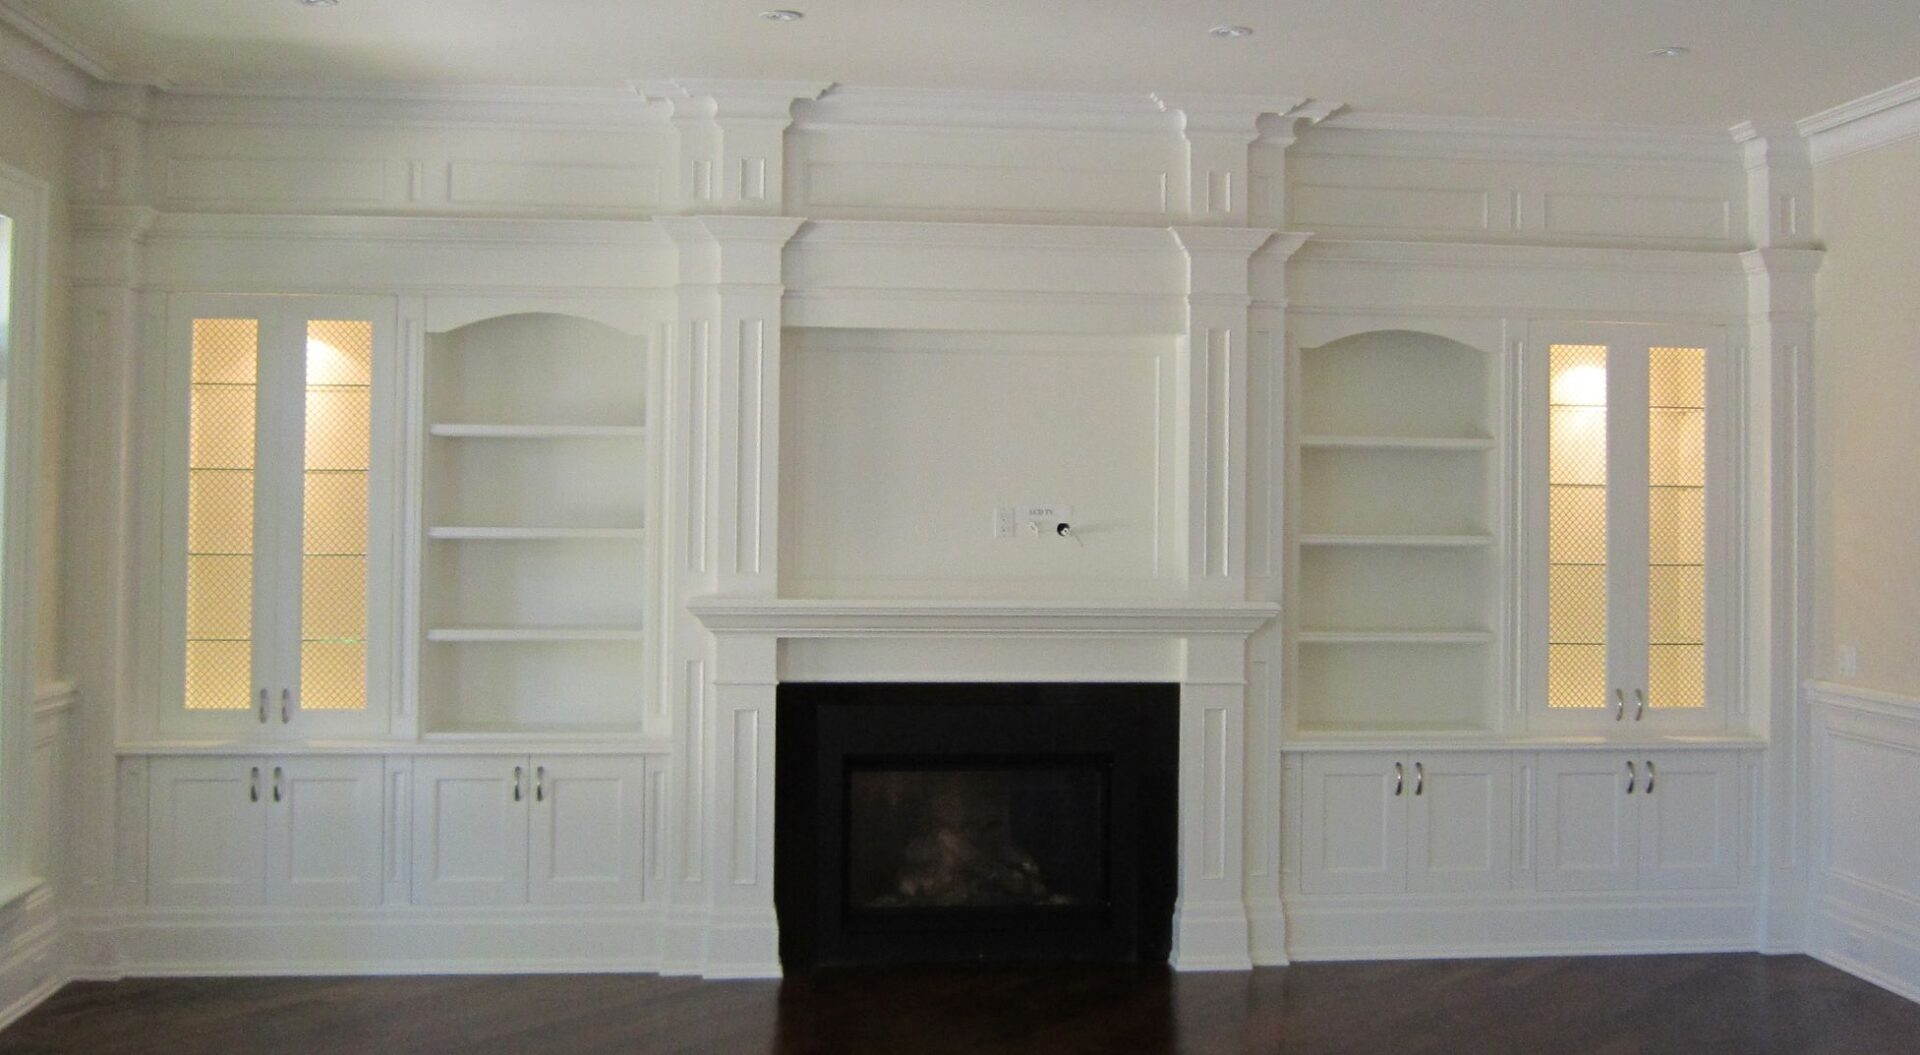 A While Color Cupboards With a Fireplace in the Middle